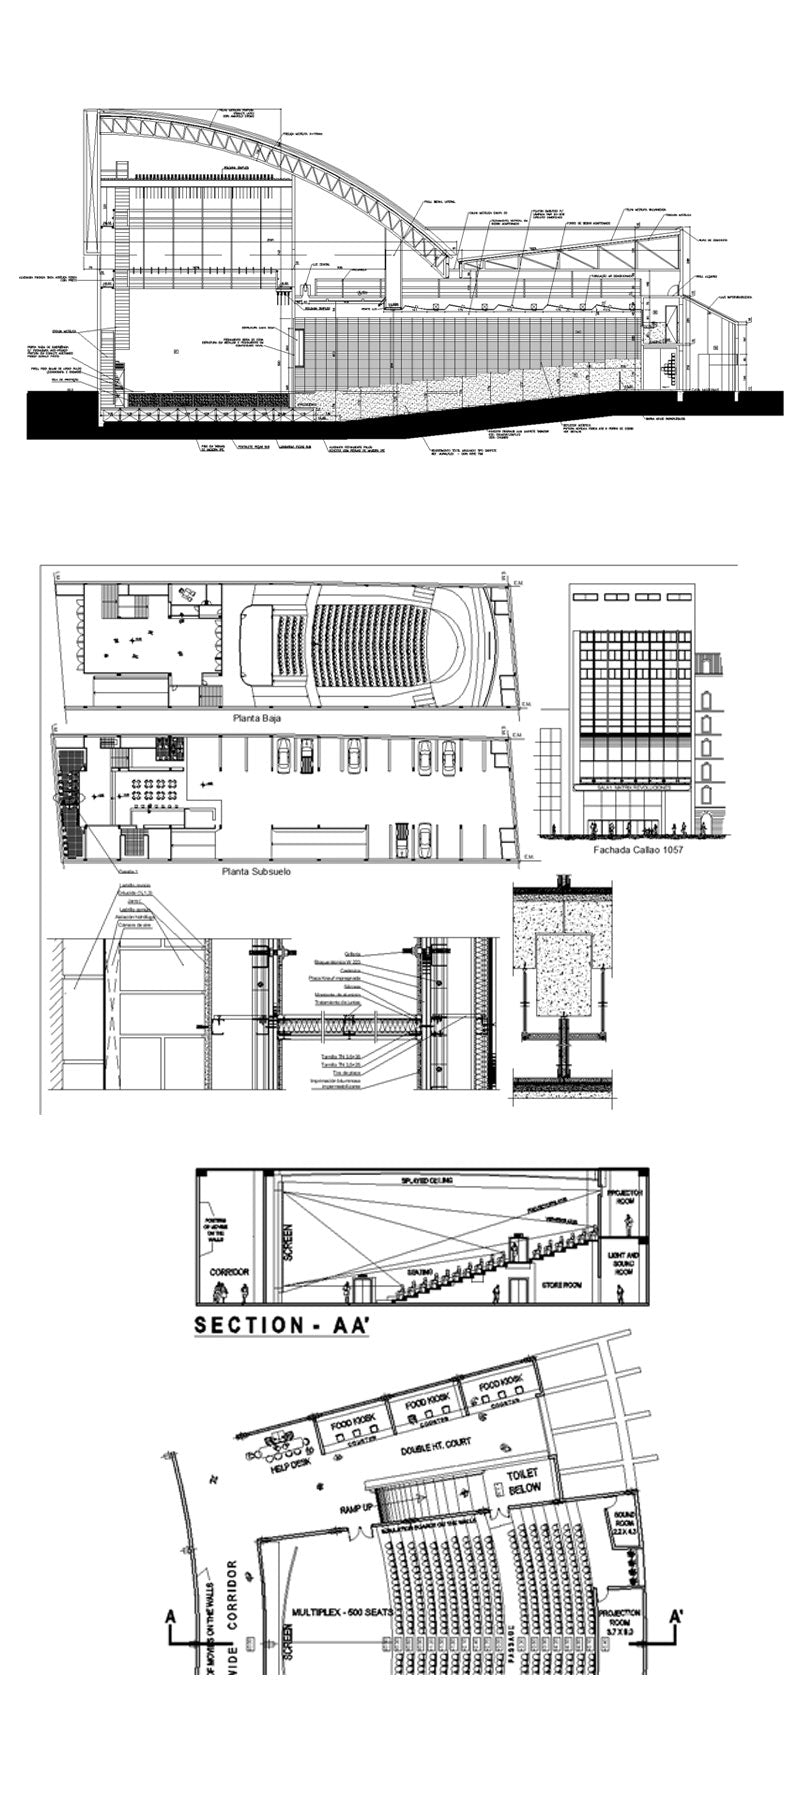 ★【Cinema CAD Drawings Collection】@Cinema Design,Autocad Blocks,Cinema Details,Cinema Section,Cinema elevation design drawings